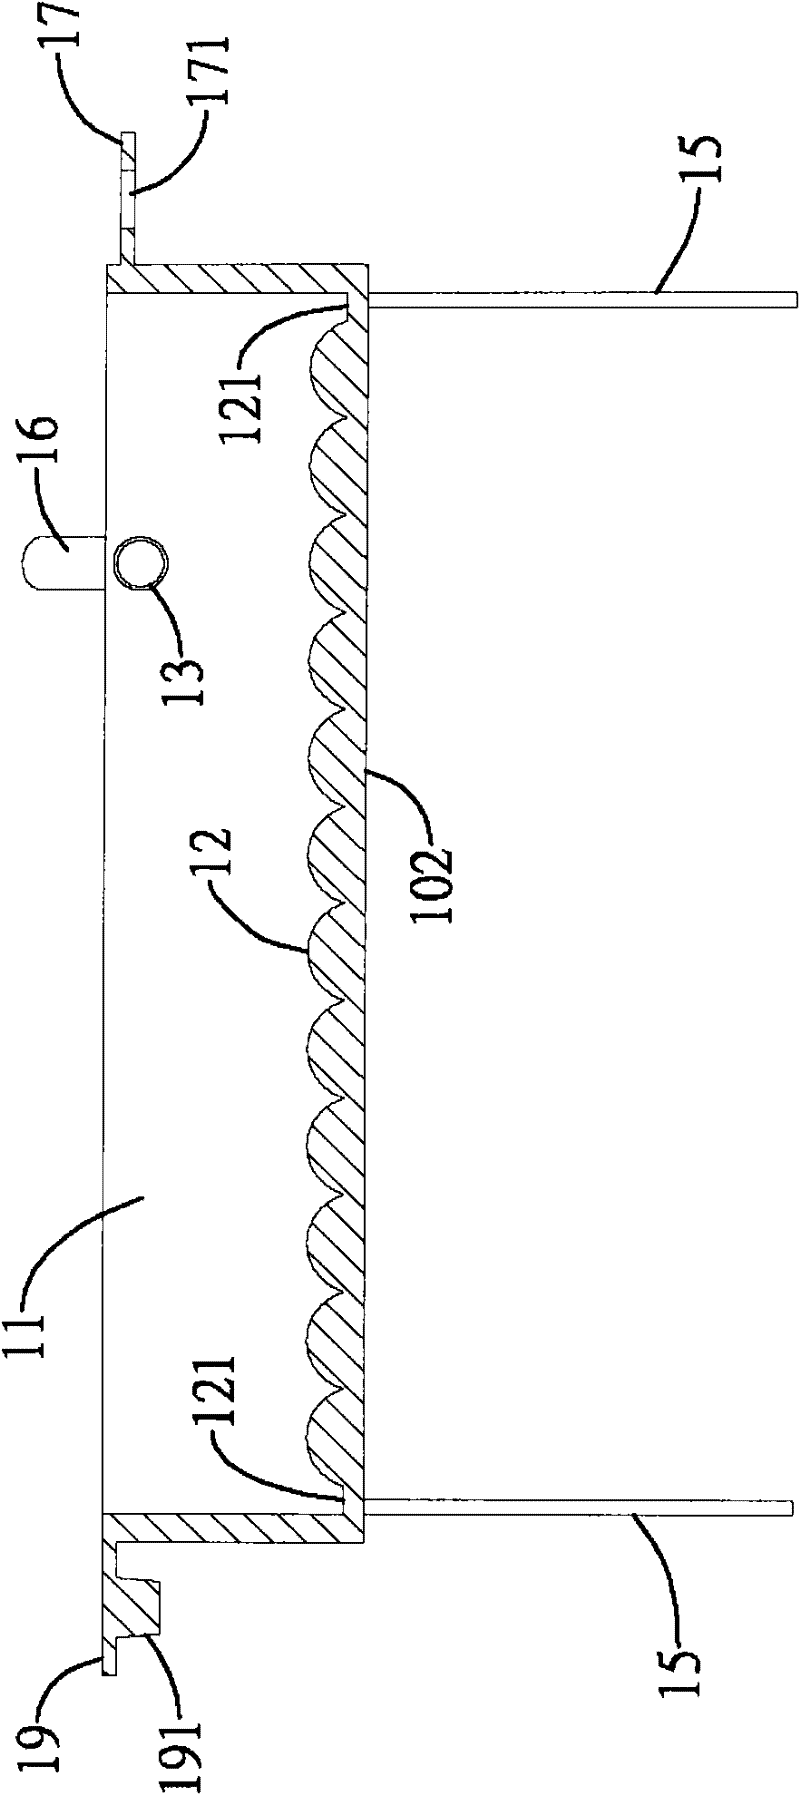 Aquaculture device and assembly and method thereof